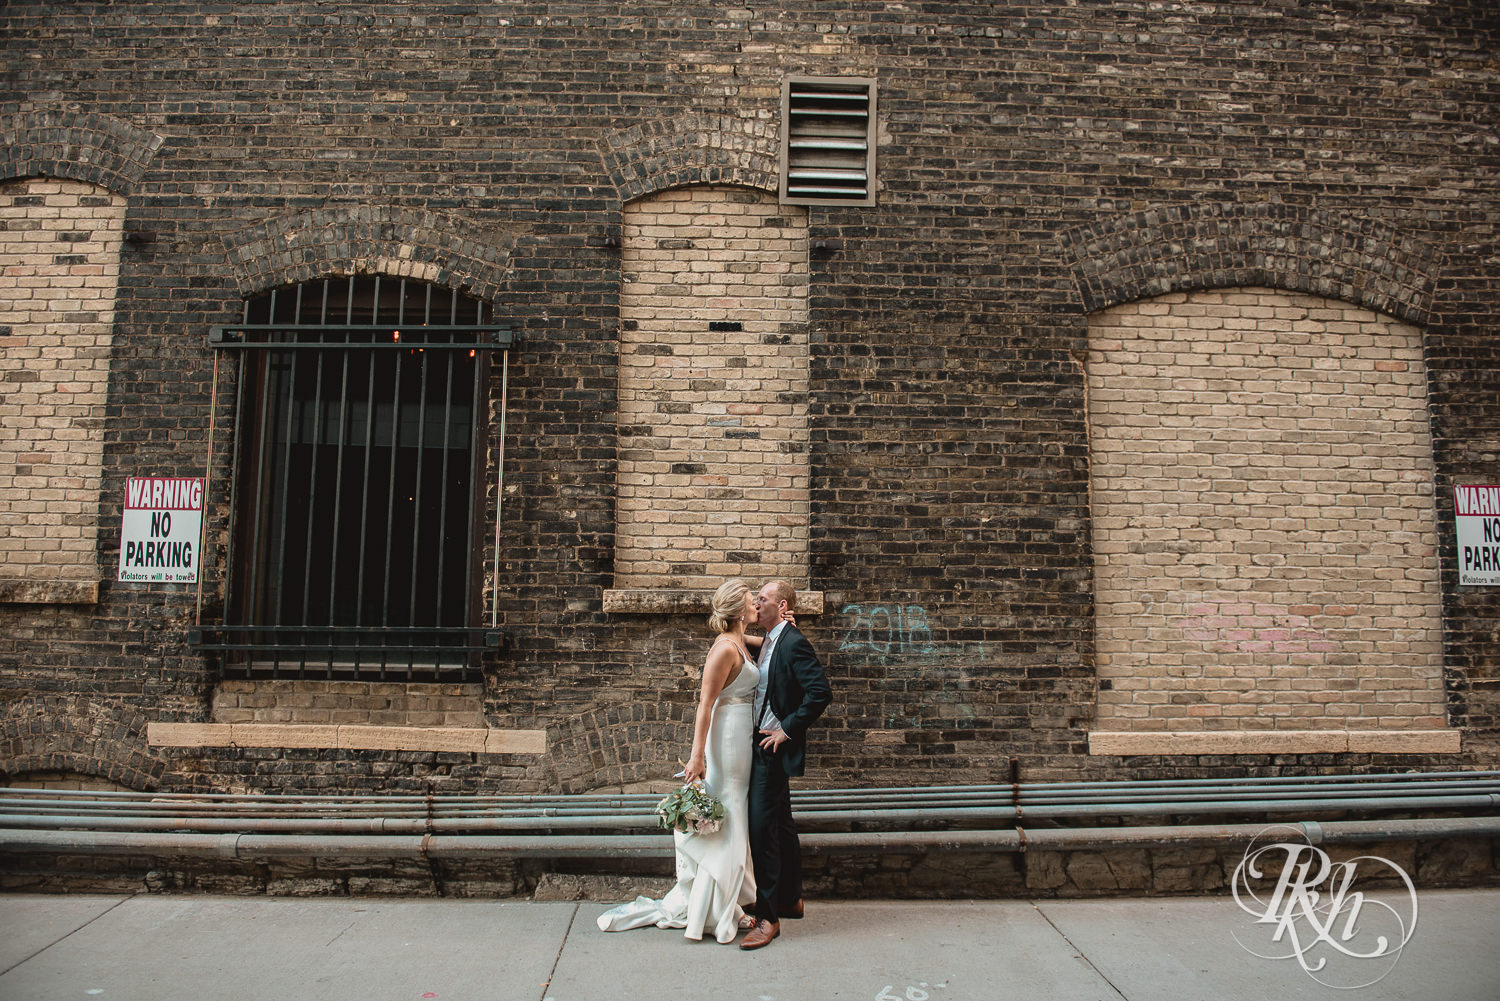 Bride and groom kiss in an alley on their wedding day in Minneapolis, Minnesota.